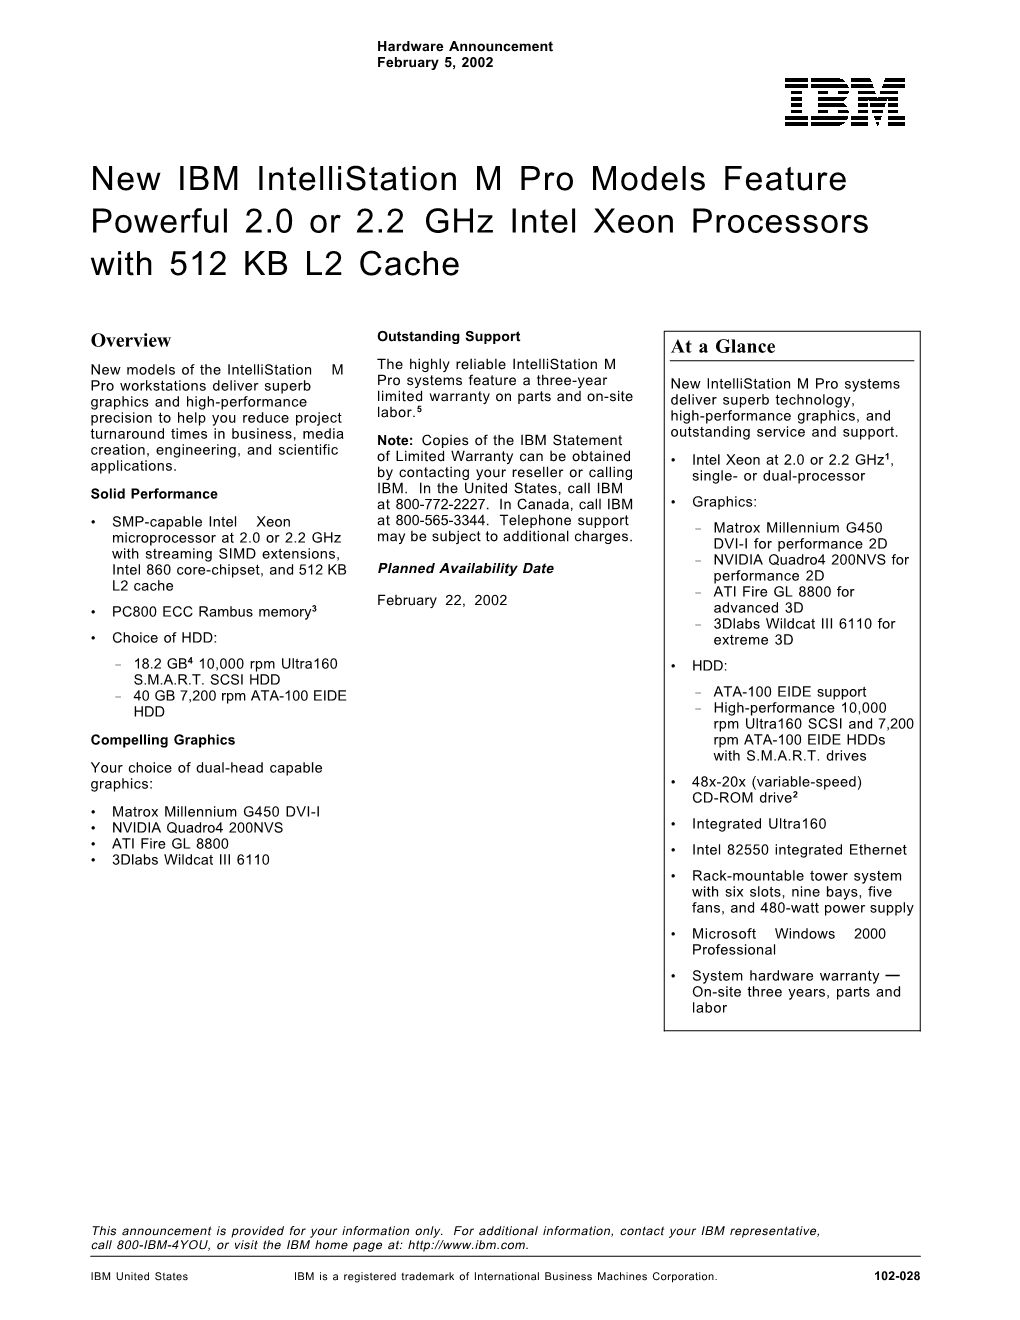 New IBM Intellistation M Pro Models Feature Powerful 2.0 Or 2.2 Ghz Intel Xeon Processors with 512 KB L2 Cache